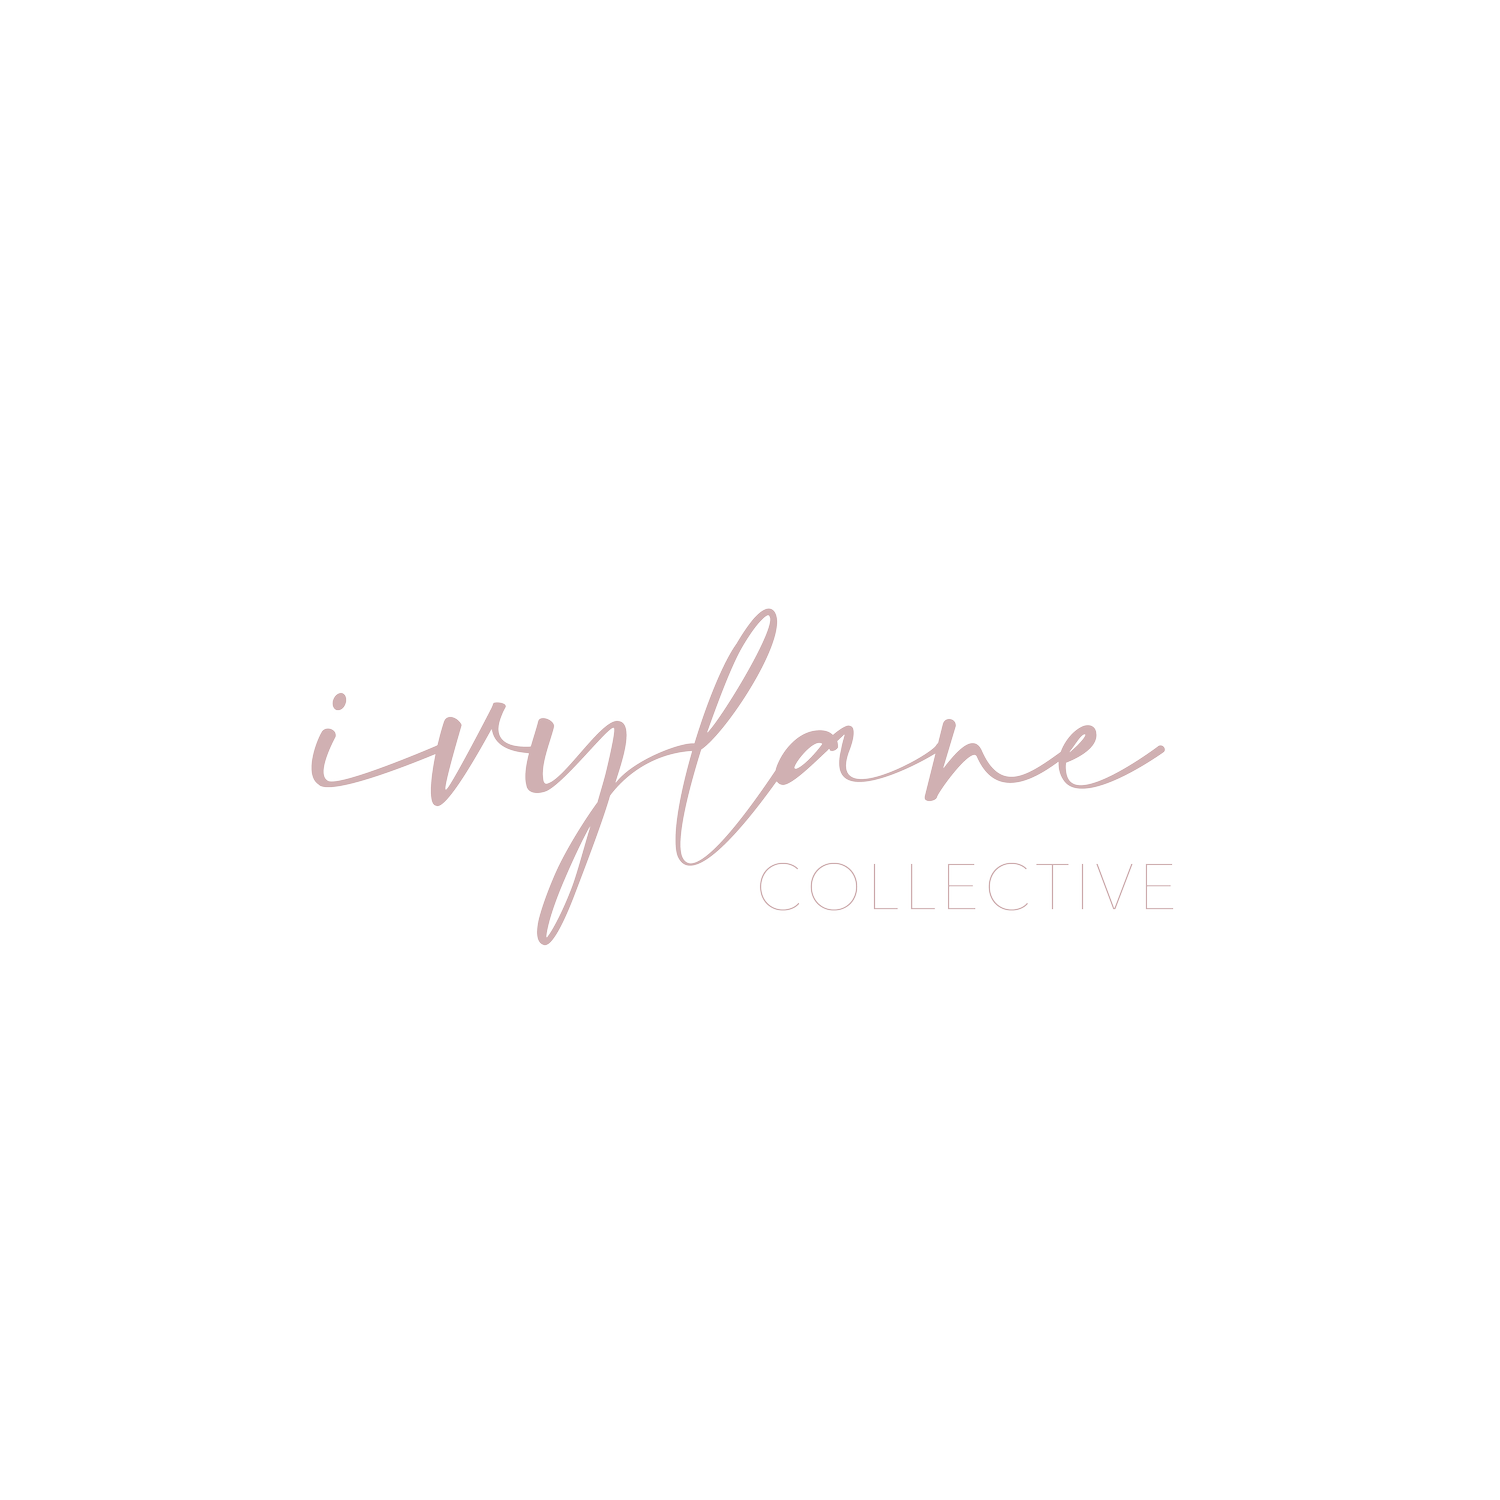 Ivy Lane Collective